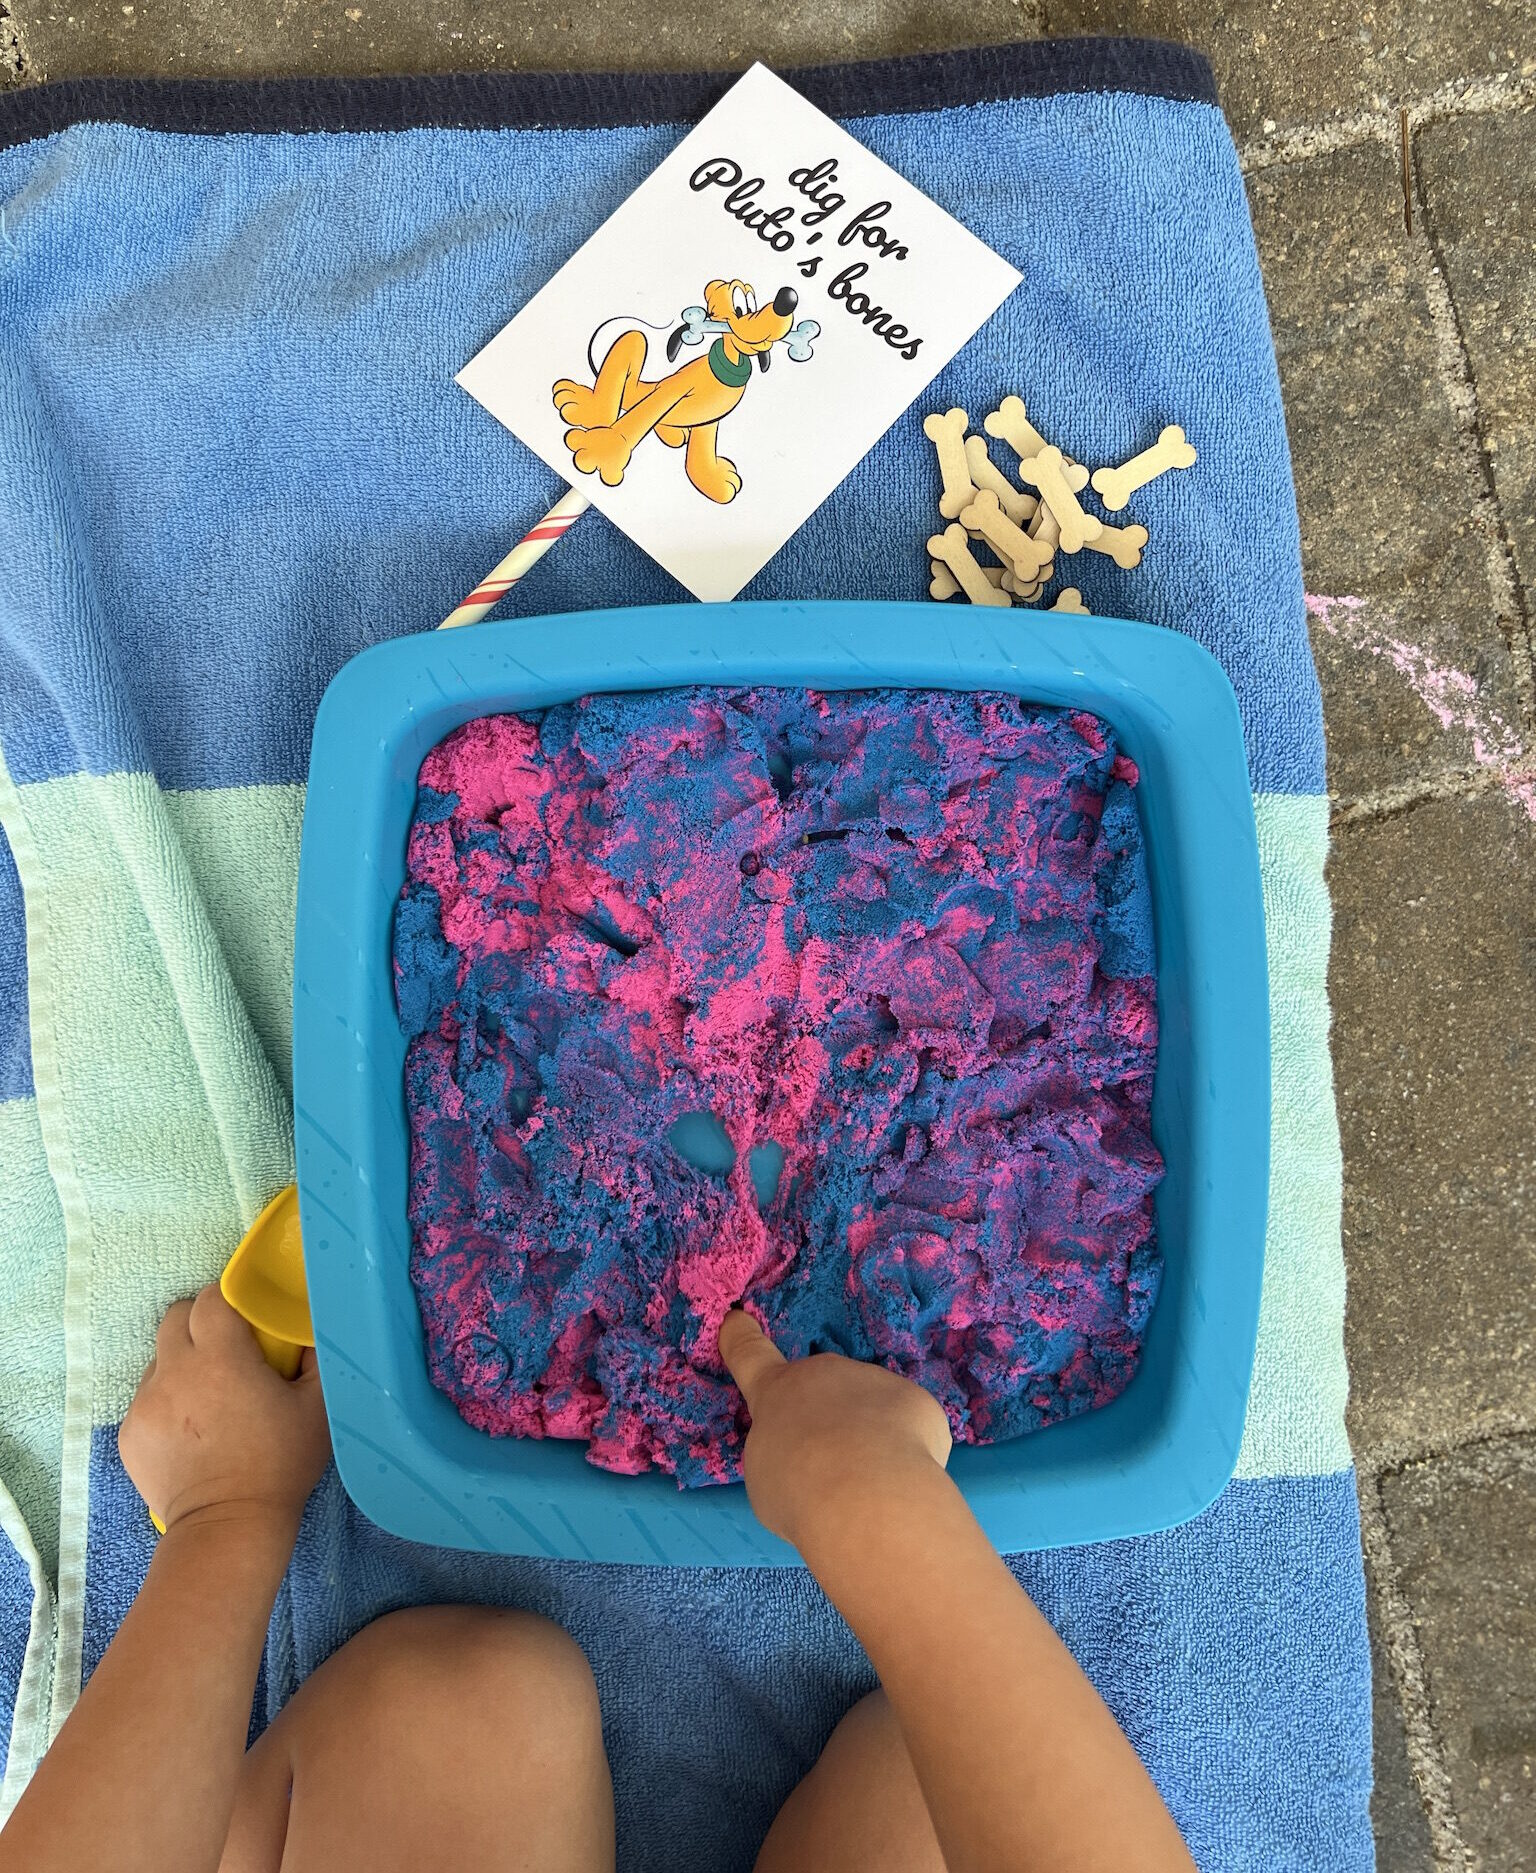 Dig for Pluto's Bones Sensory Bin Activity at Pepper's Magical "Mickey & Minnie Mouse" 3rd Birthday Pool Party | Creative ideas for hosting a magical Mickey & Minnie themed birthday bash for your little Mouseketeer with do-able decor, punny snacks, and party games that are fun for all ages! via thinkingcloset.com